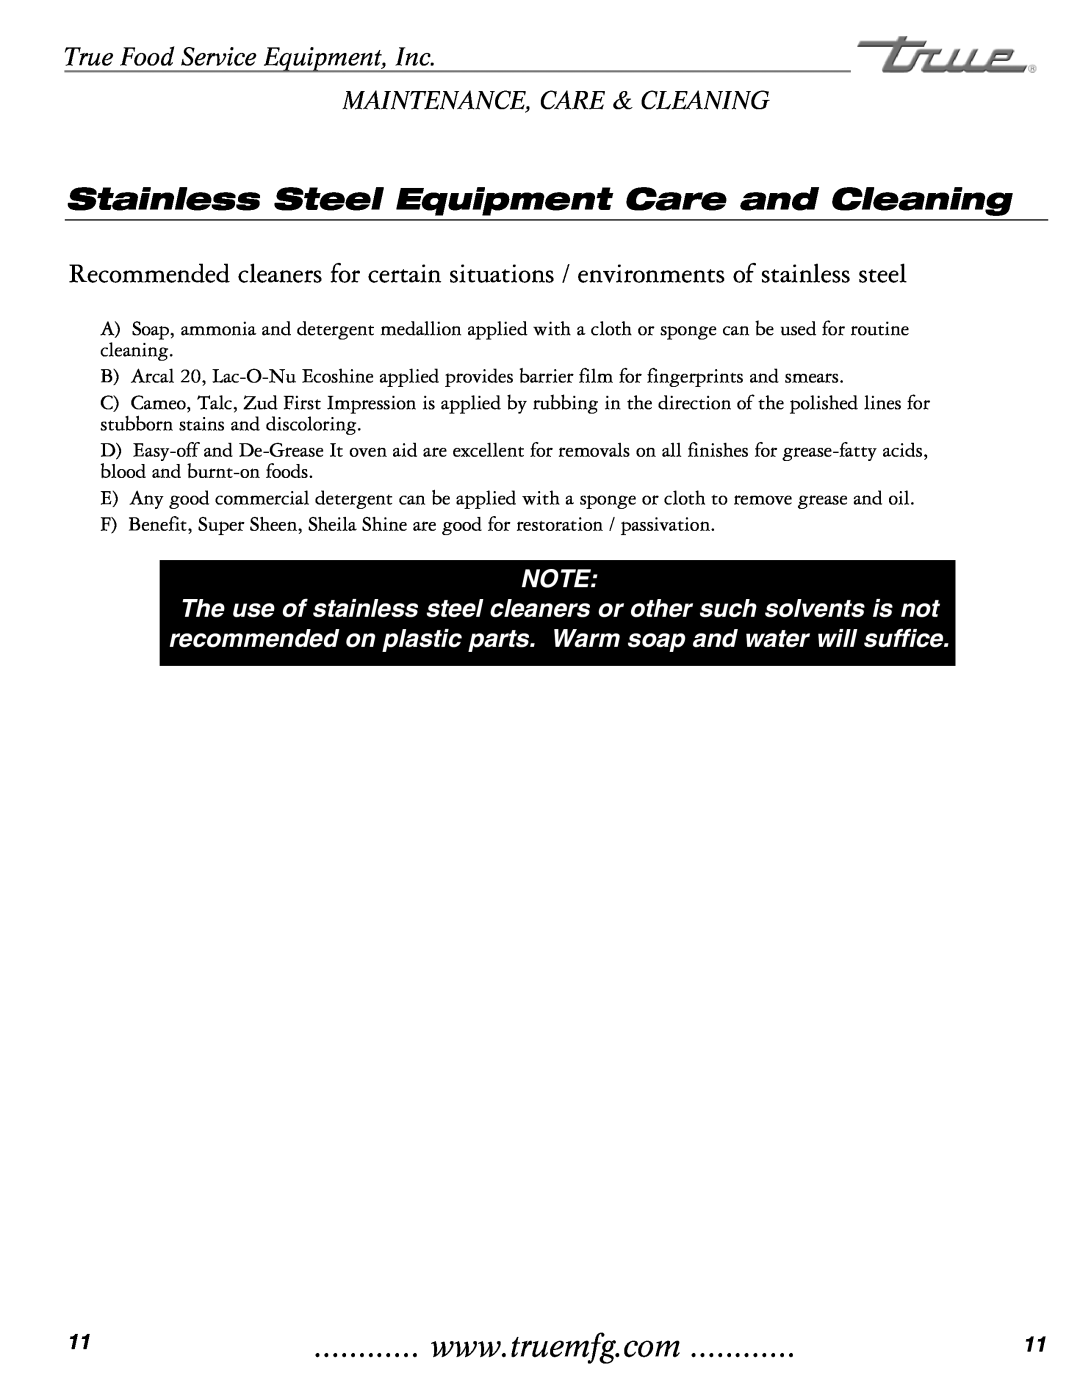 True Manufacturing Company THF-41FL installation manual Stainless Steel Equipment Care and Cleaning 